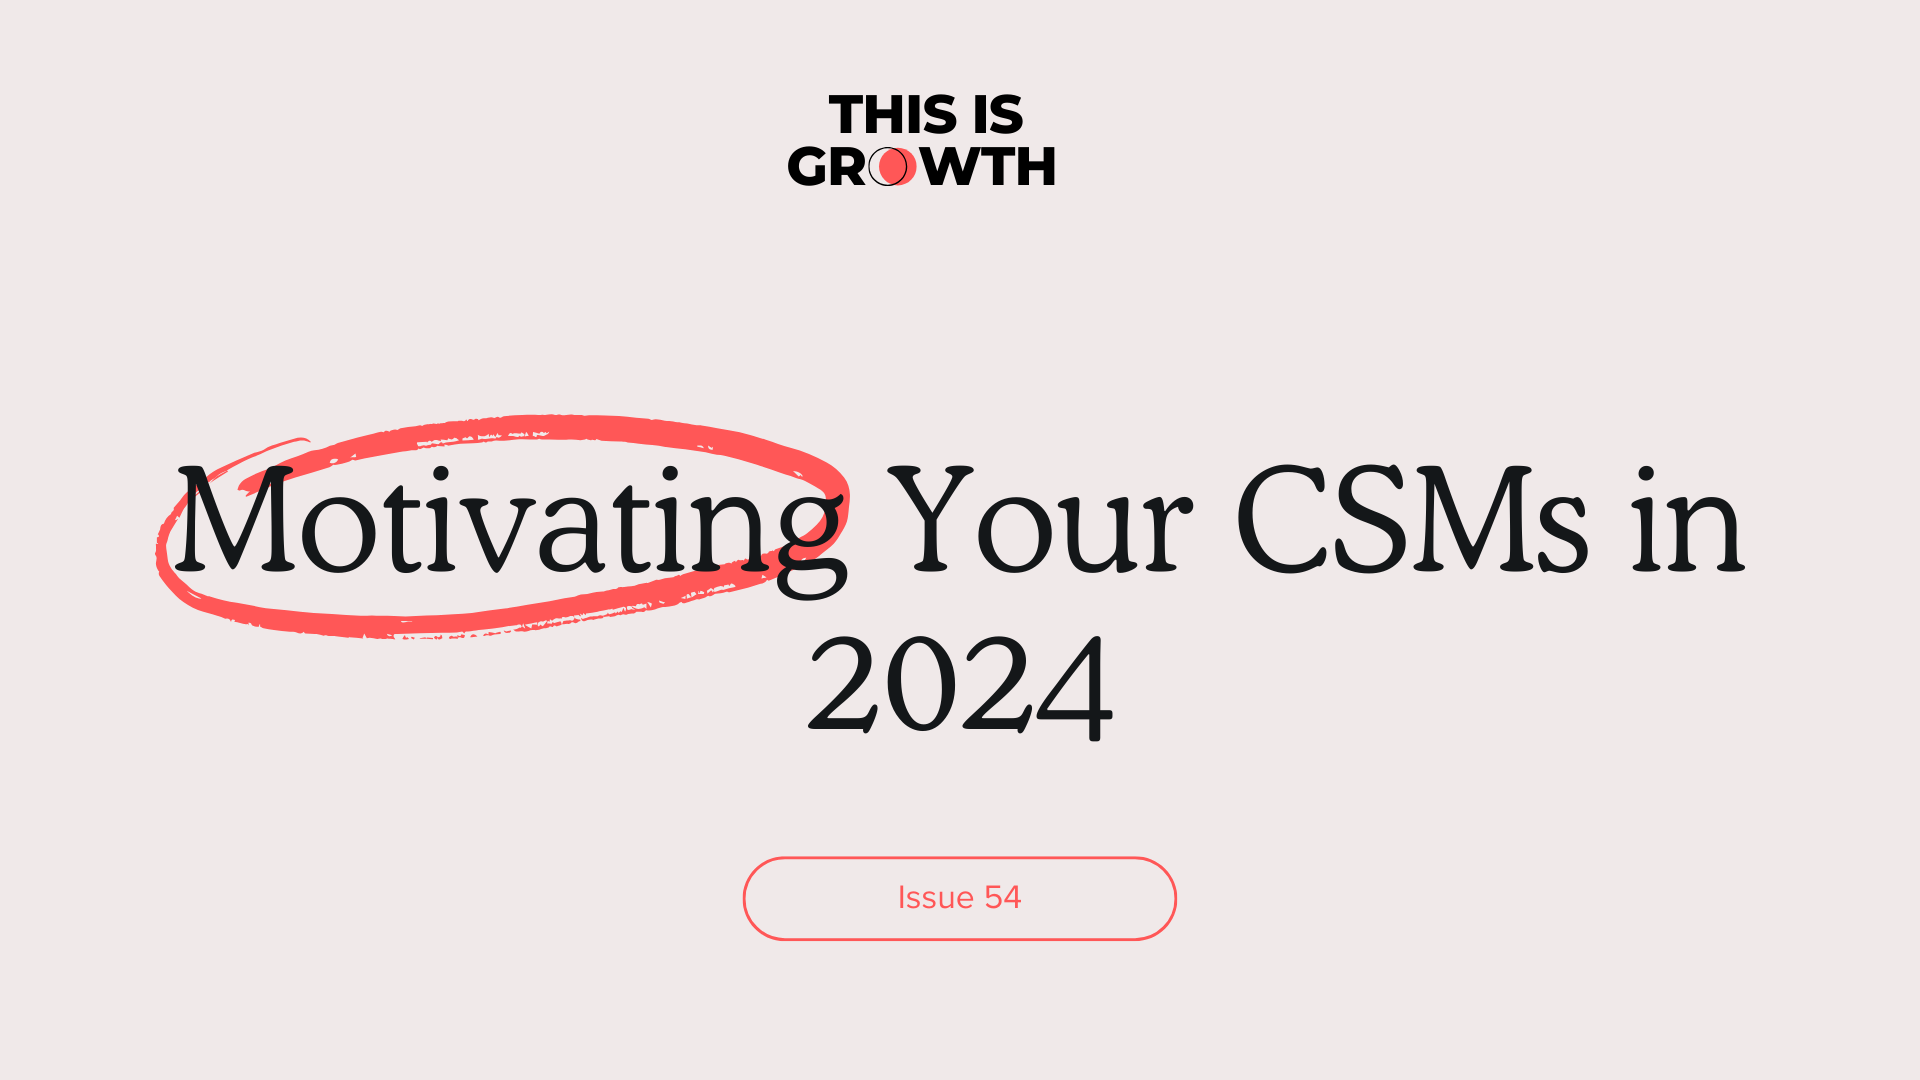 Motivating Your CSMs in 2024